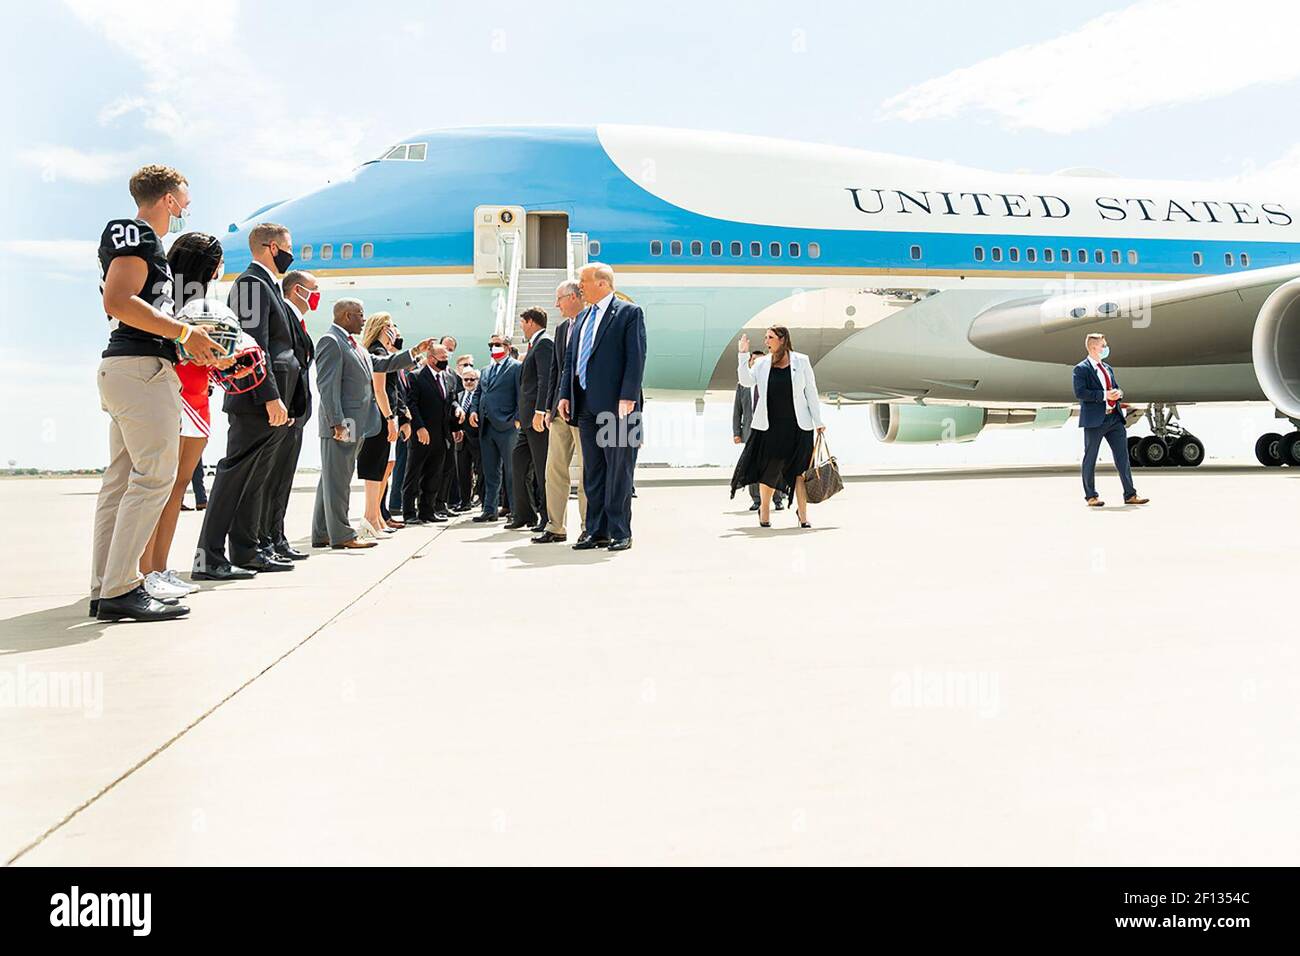 President Donald Trump disembarks Air Force One at Midland International Air and Space Port in Midland Texas Wednesday July 29 2020 and is greeted by Texas Gov. Greg Abbott former Secretary of Energy Rick Perry Texas Lt.Gov. Dan Patrick Texas Republican Chairman Allen West U.S. Representative candidates and members of the community. Stock Photo